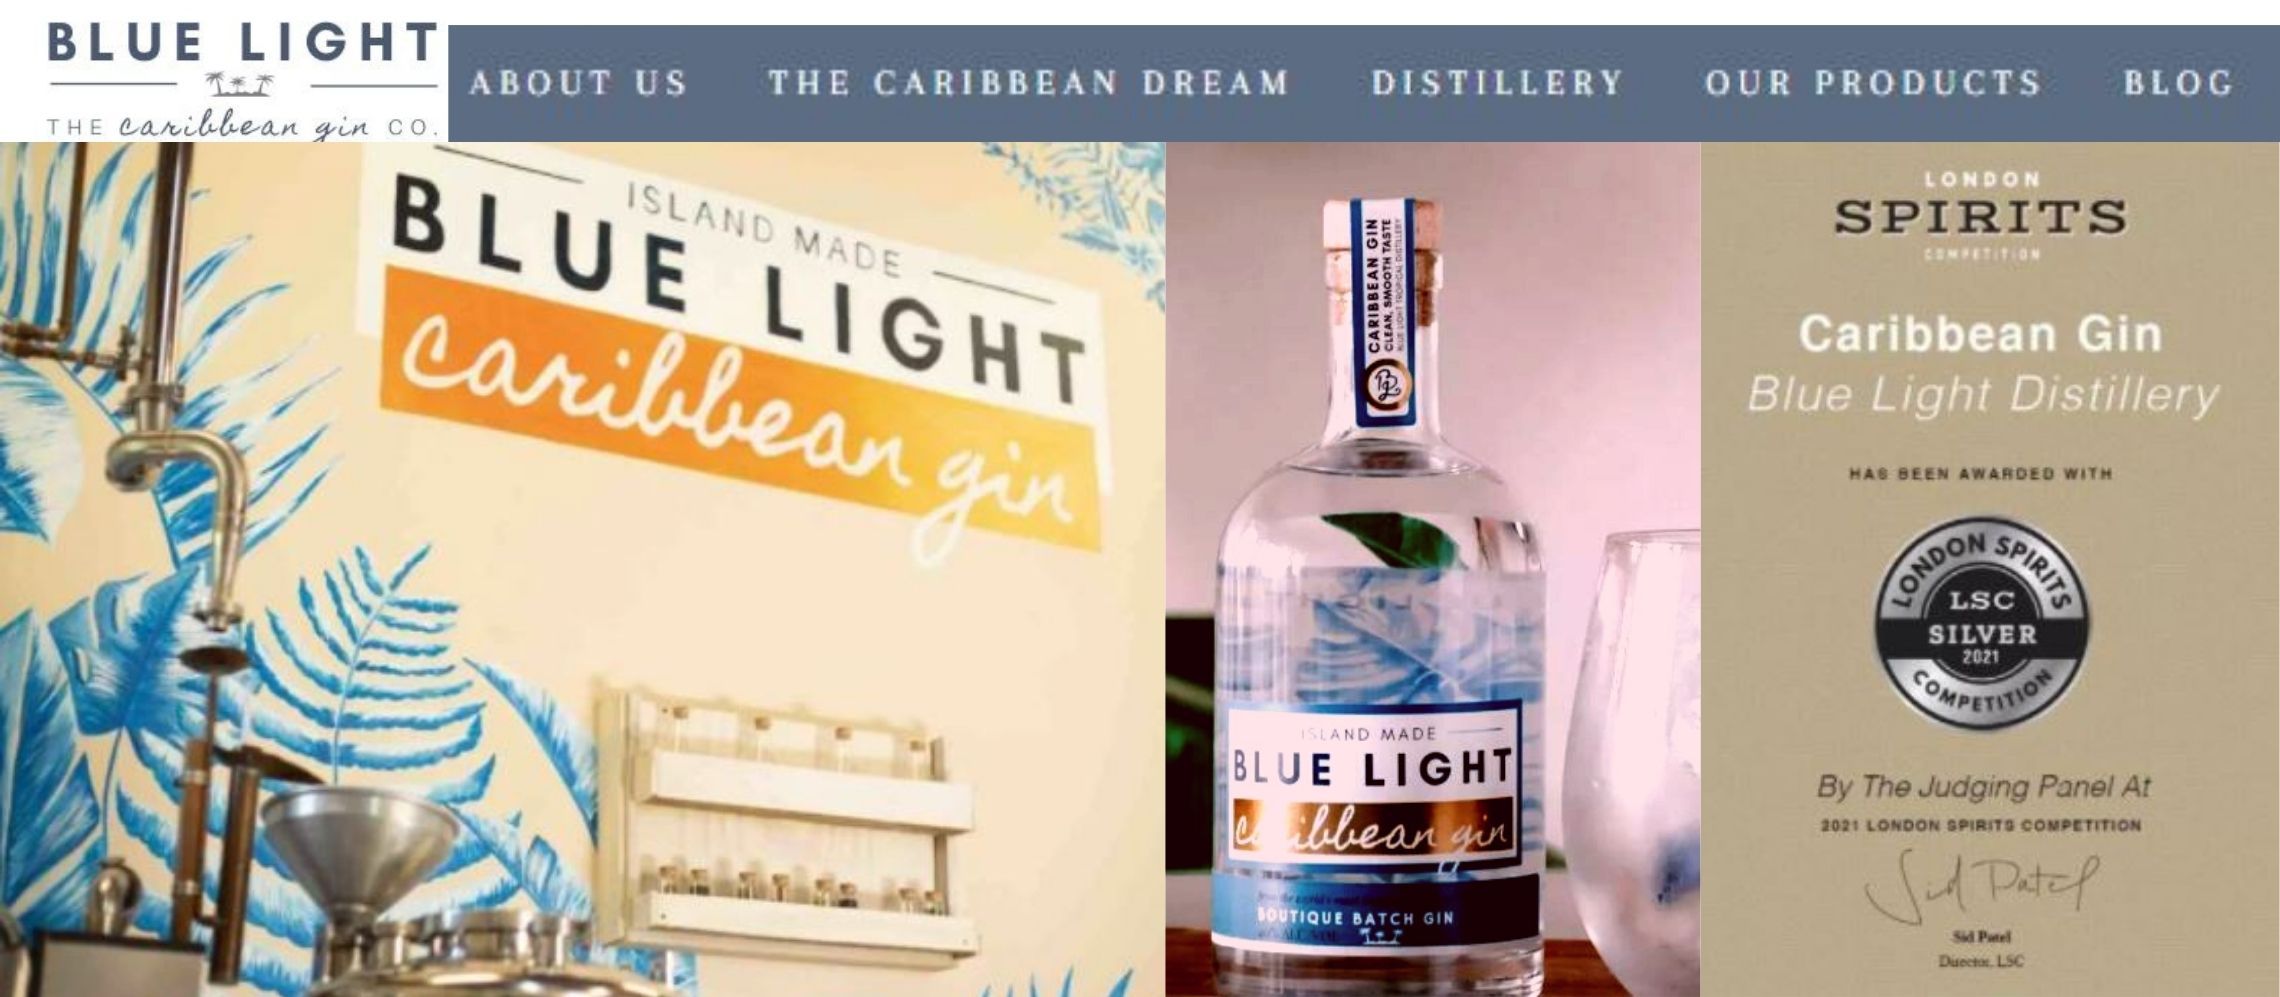 Photo for: Caribbean Gin scores Silver Medal at London Spirits Competition 2021 via Blue Light Gin PR